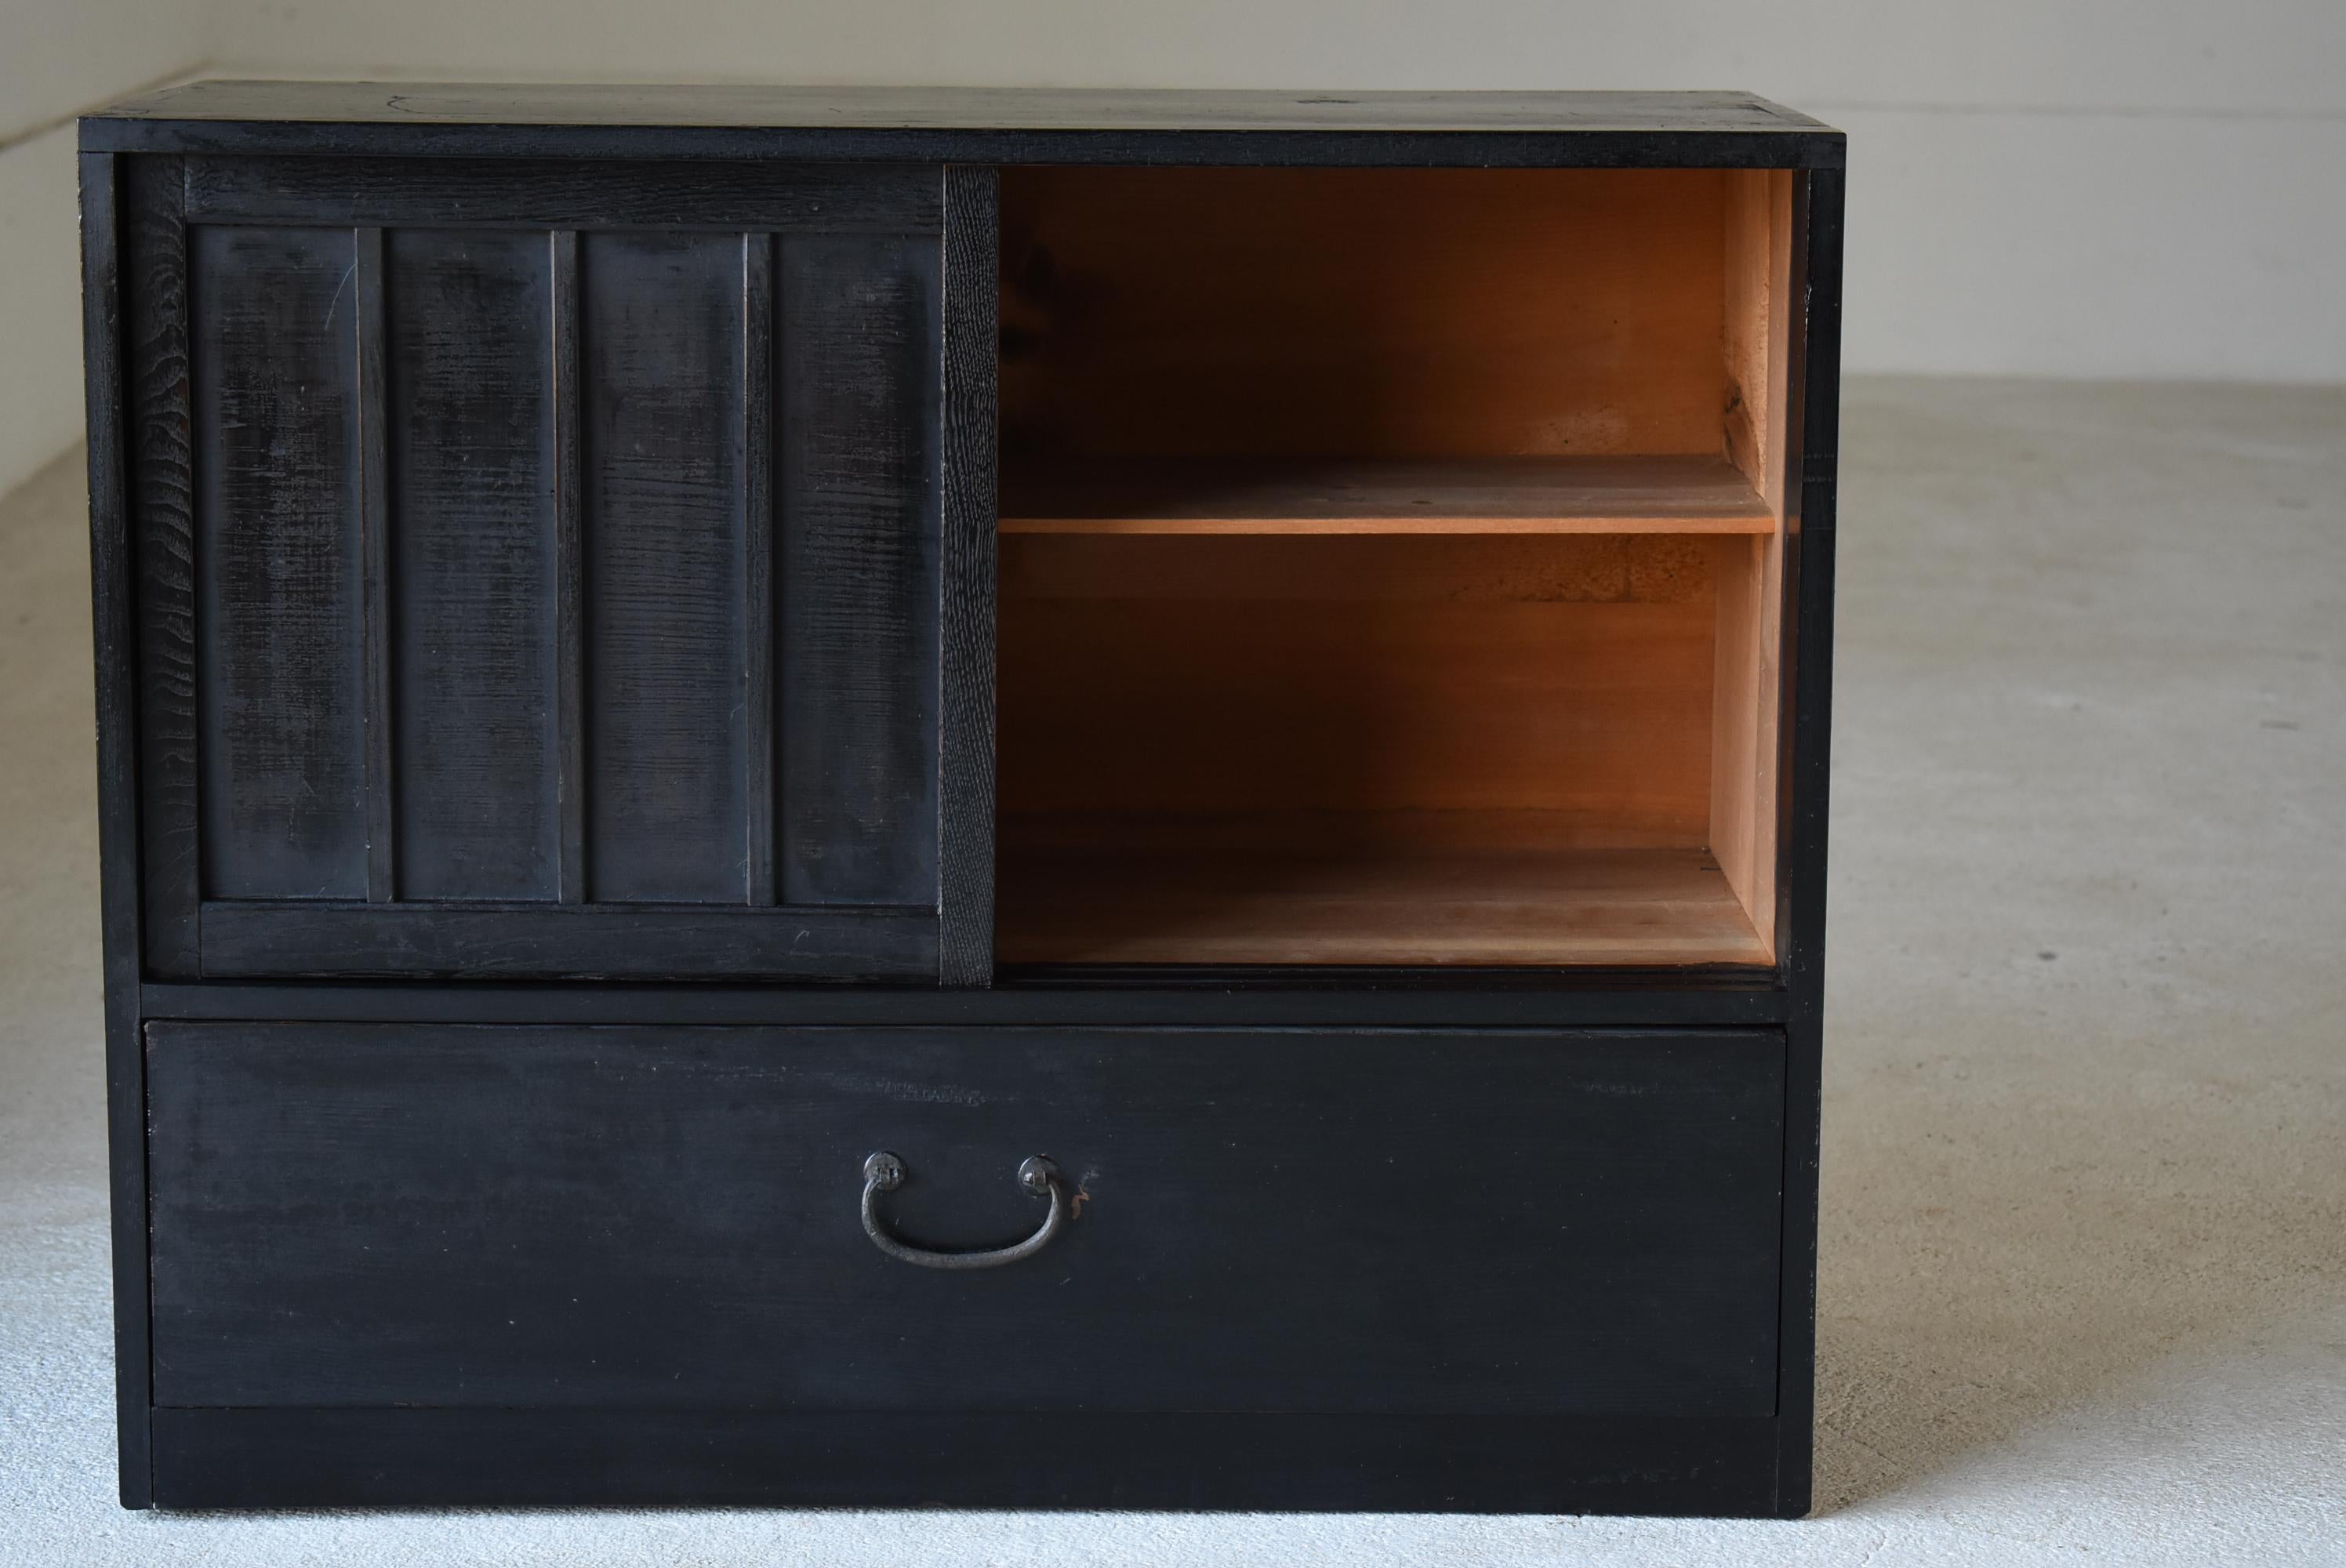 Cedar Japanese Antique Black Cabinet 1860s-1920s/Chests of Drawers Shelf Tansu